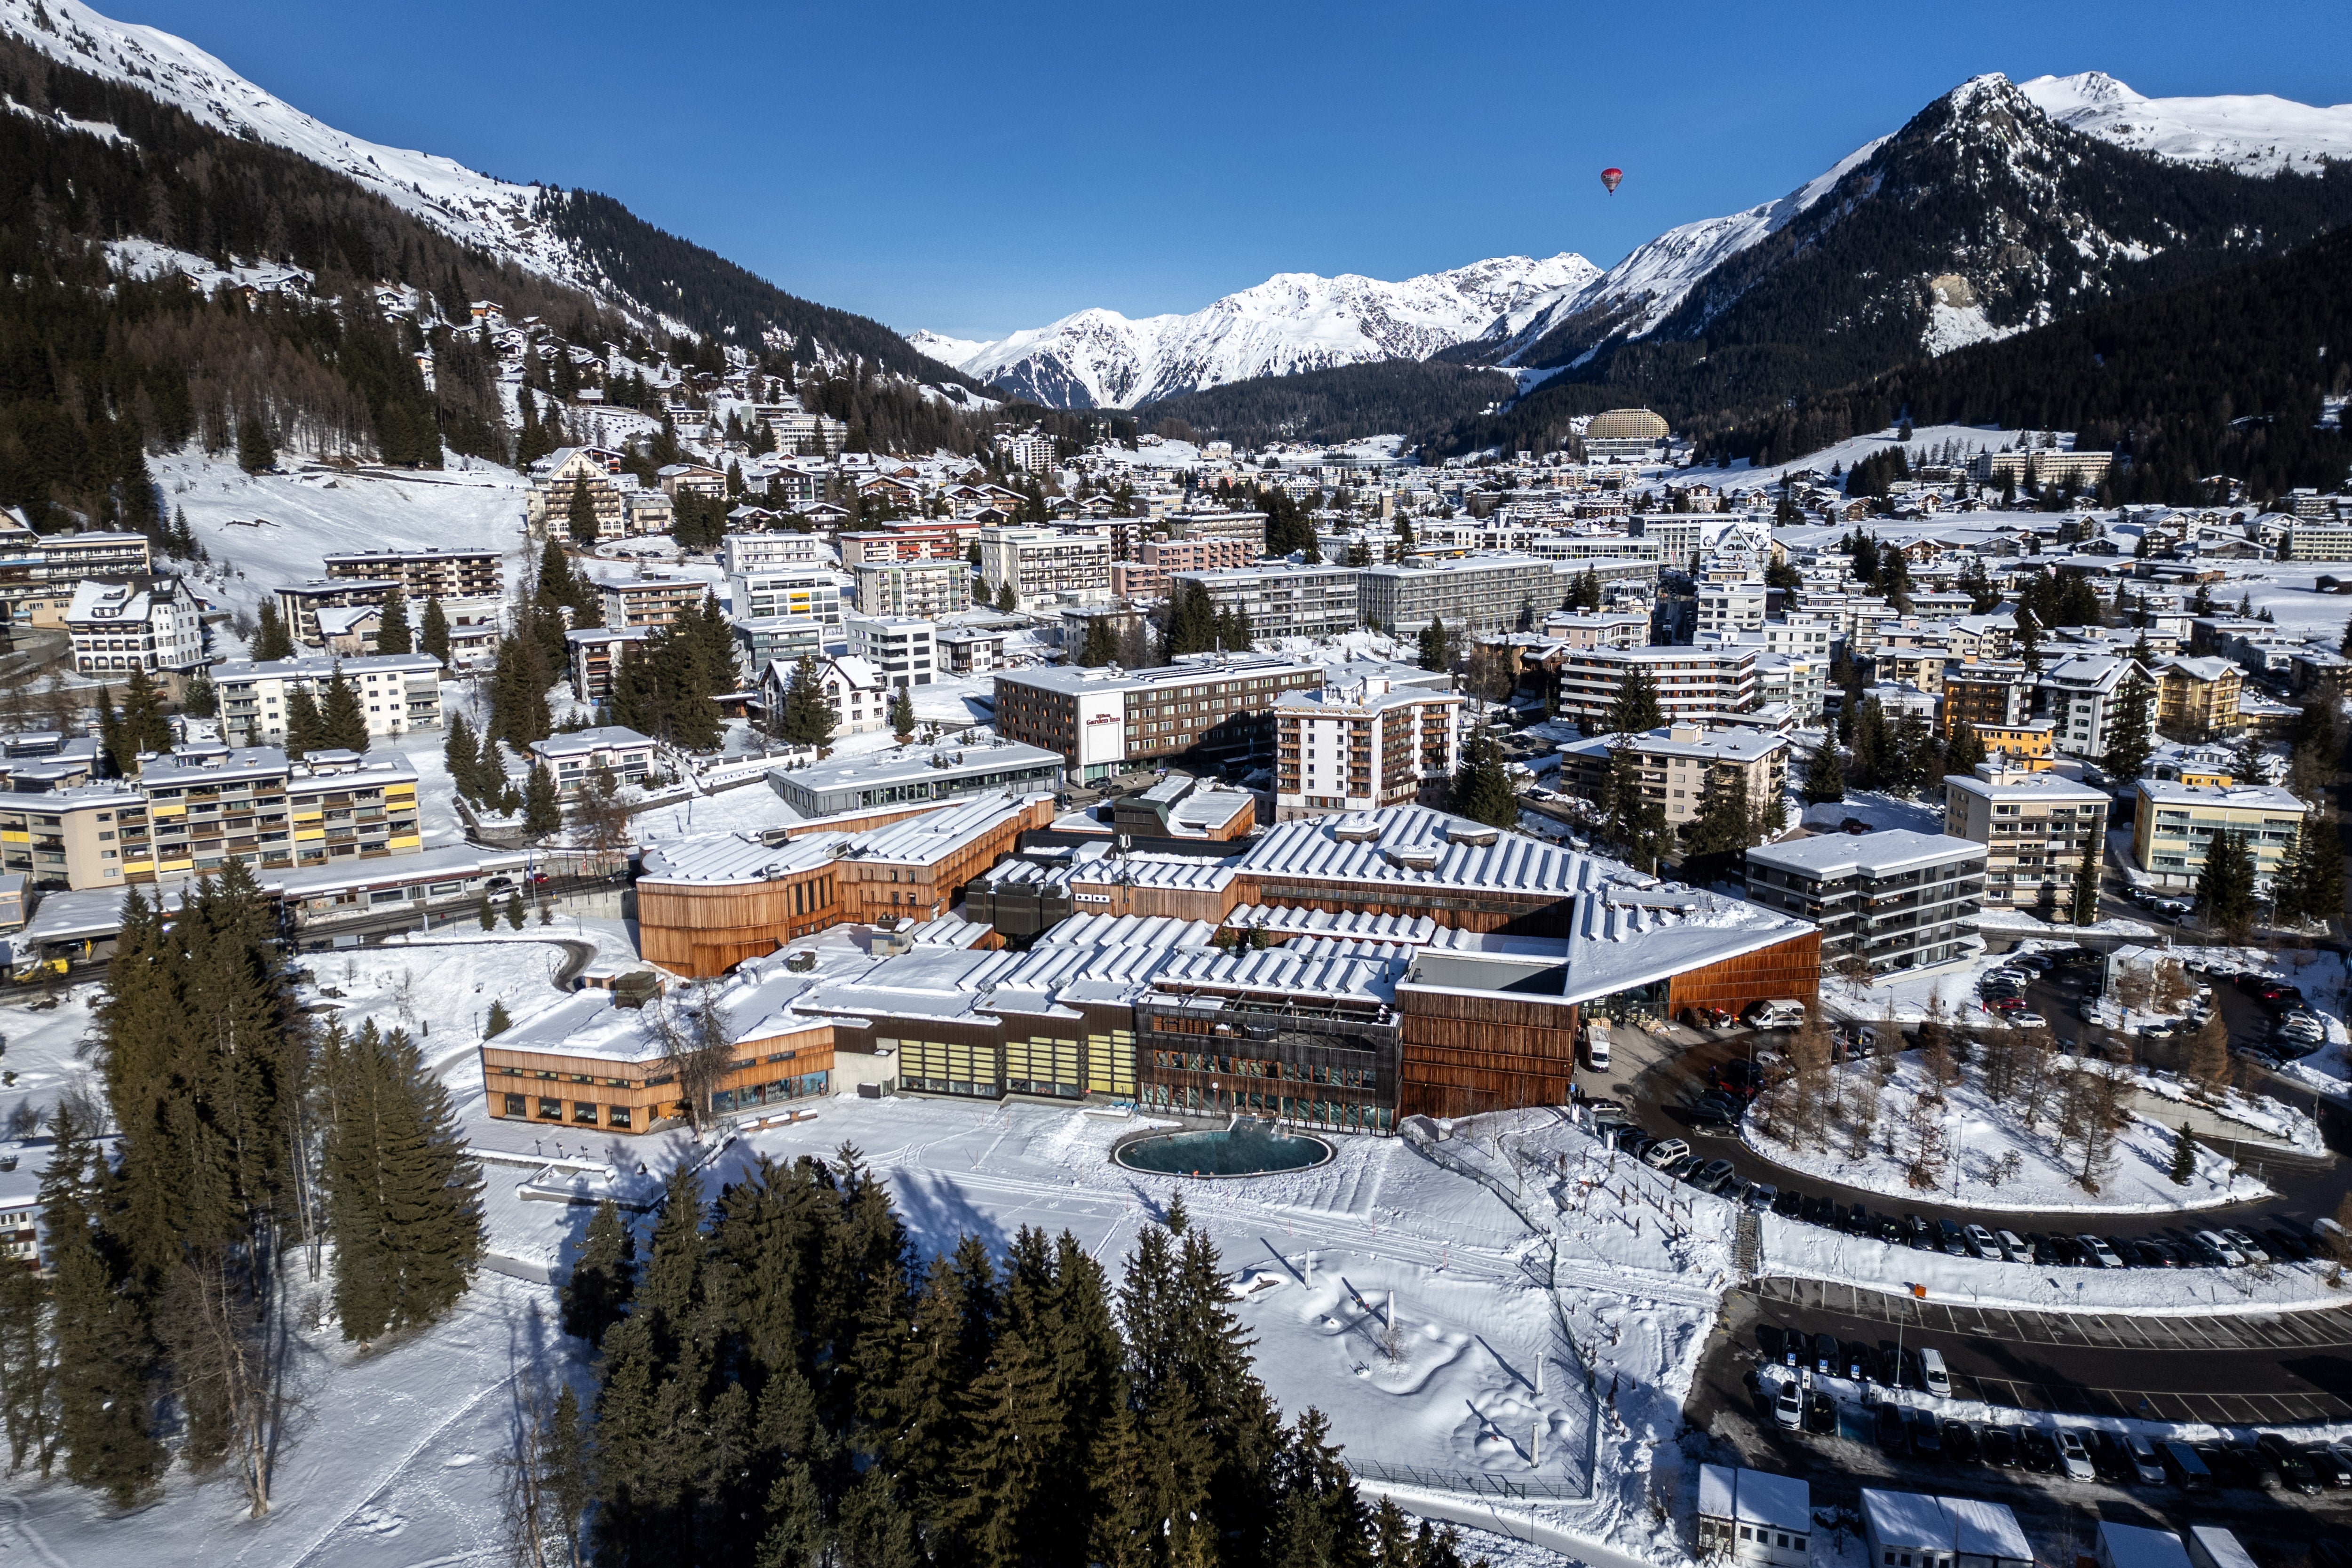 The Congress Centre at Davos where the 54th annual meeting of the World Economic Forum was held, 15 to 19 January